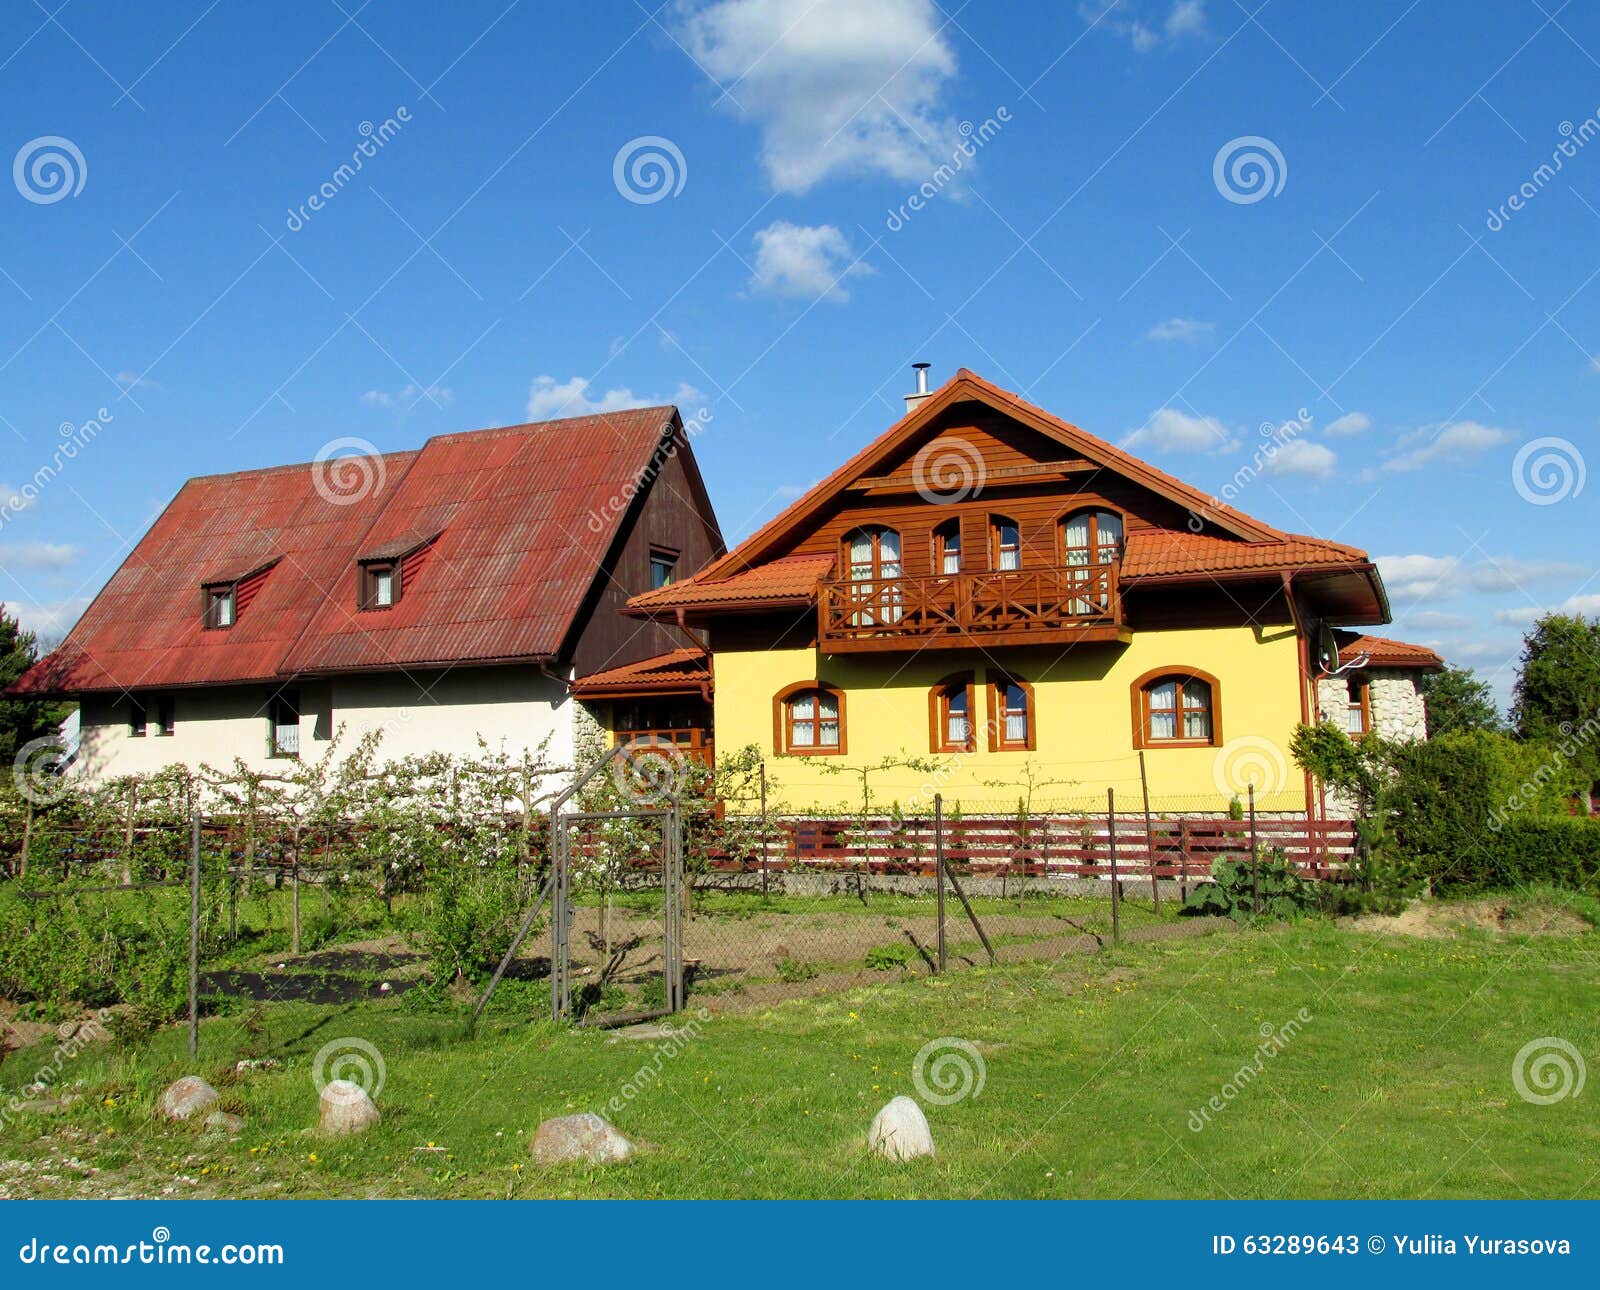 idylic scene with rural house